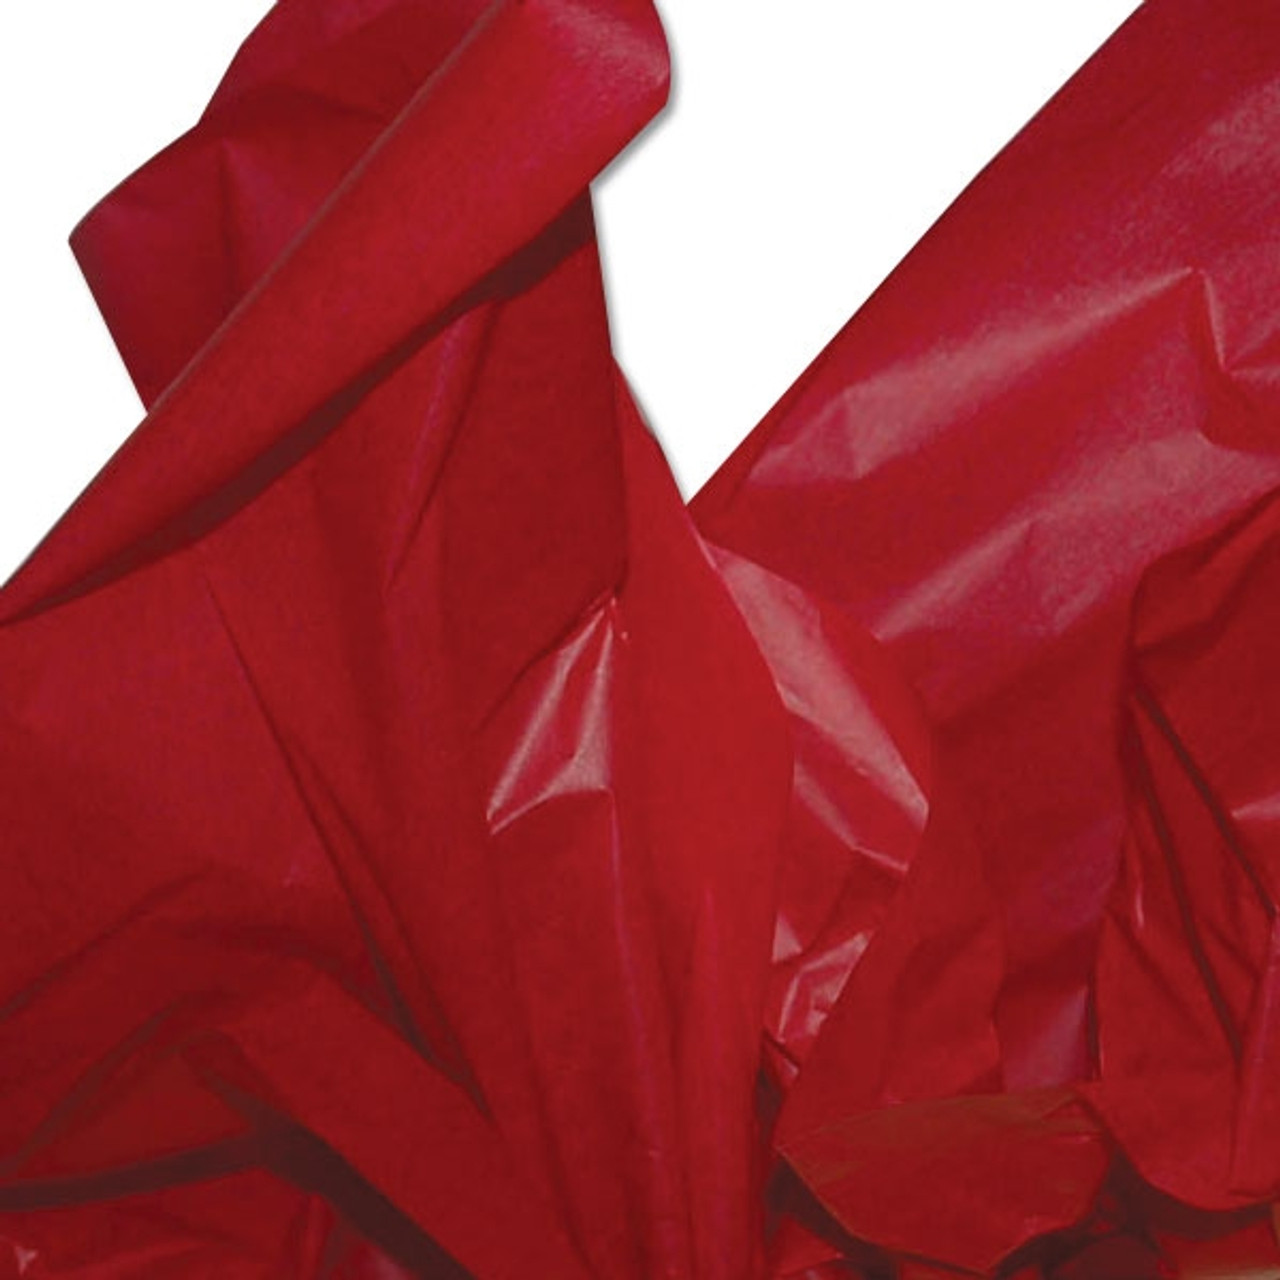 Waxed Tissue Paper - Red - 480 Sheets per Ream